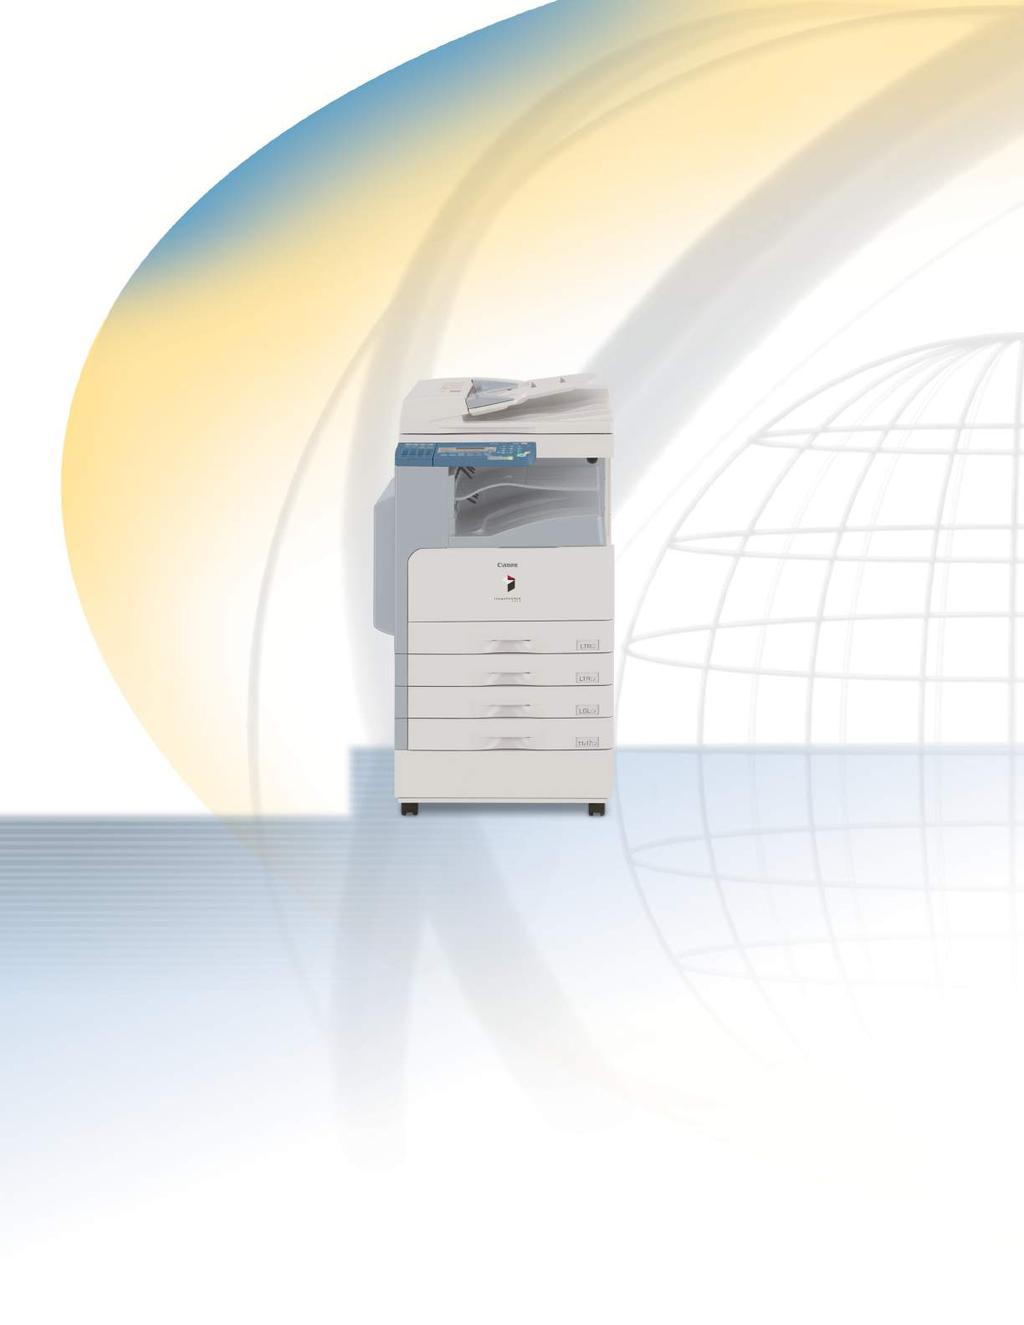 Workgroup Solutions HIGH-END PRODUCTIVITY COMES TO LOW VOLUME Powerful Canon Systems Designed to Help Every Business Produce Documents and Share Information Efficiently.